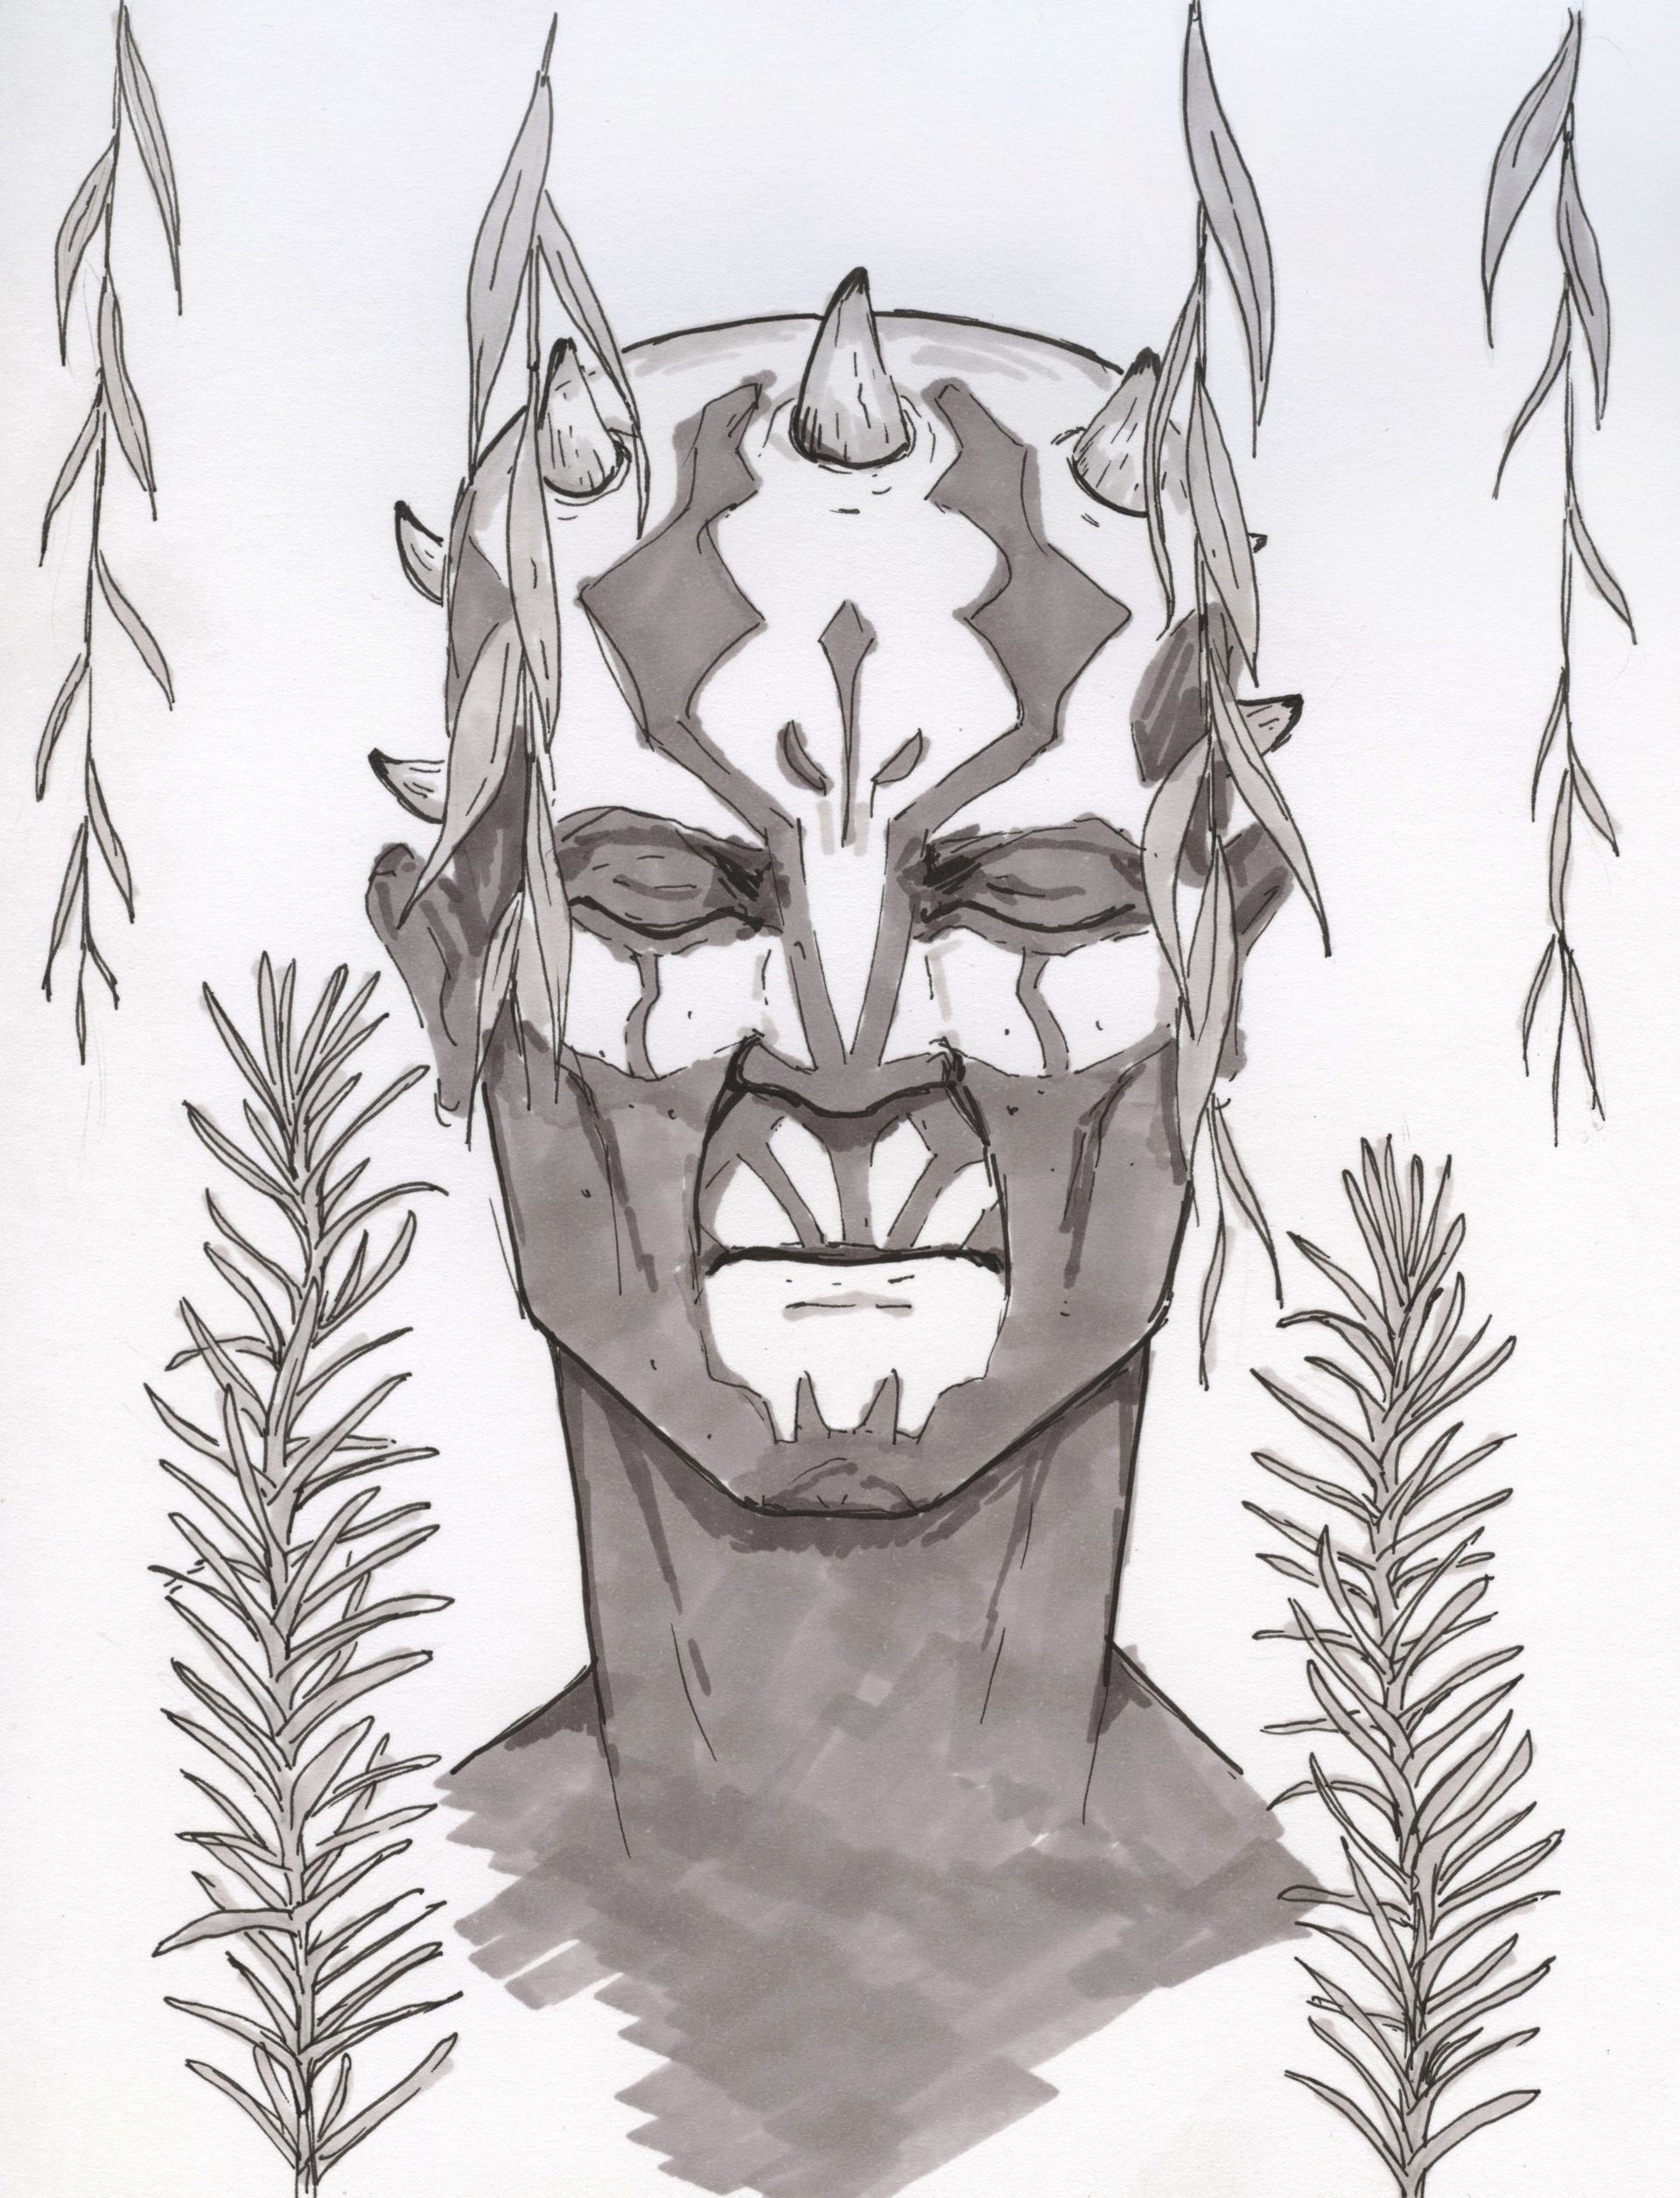 A portrait of Savage Oppress done in black liner and grey markers. It shows his face with closed eyes, partially covered by willow branches and sprigs of rosemary